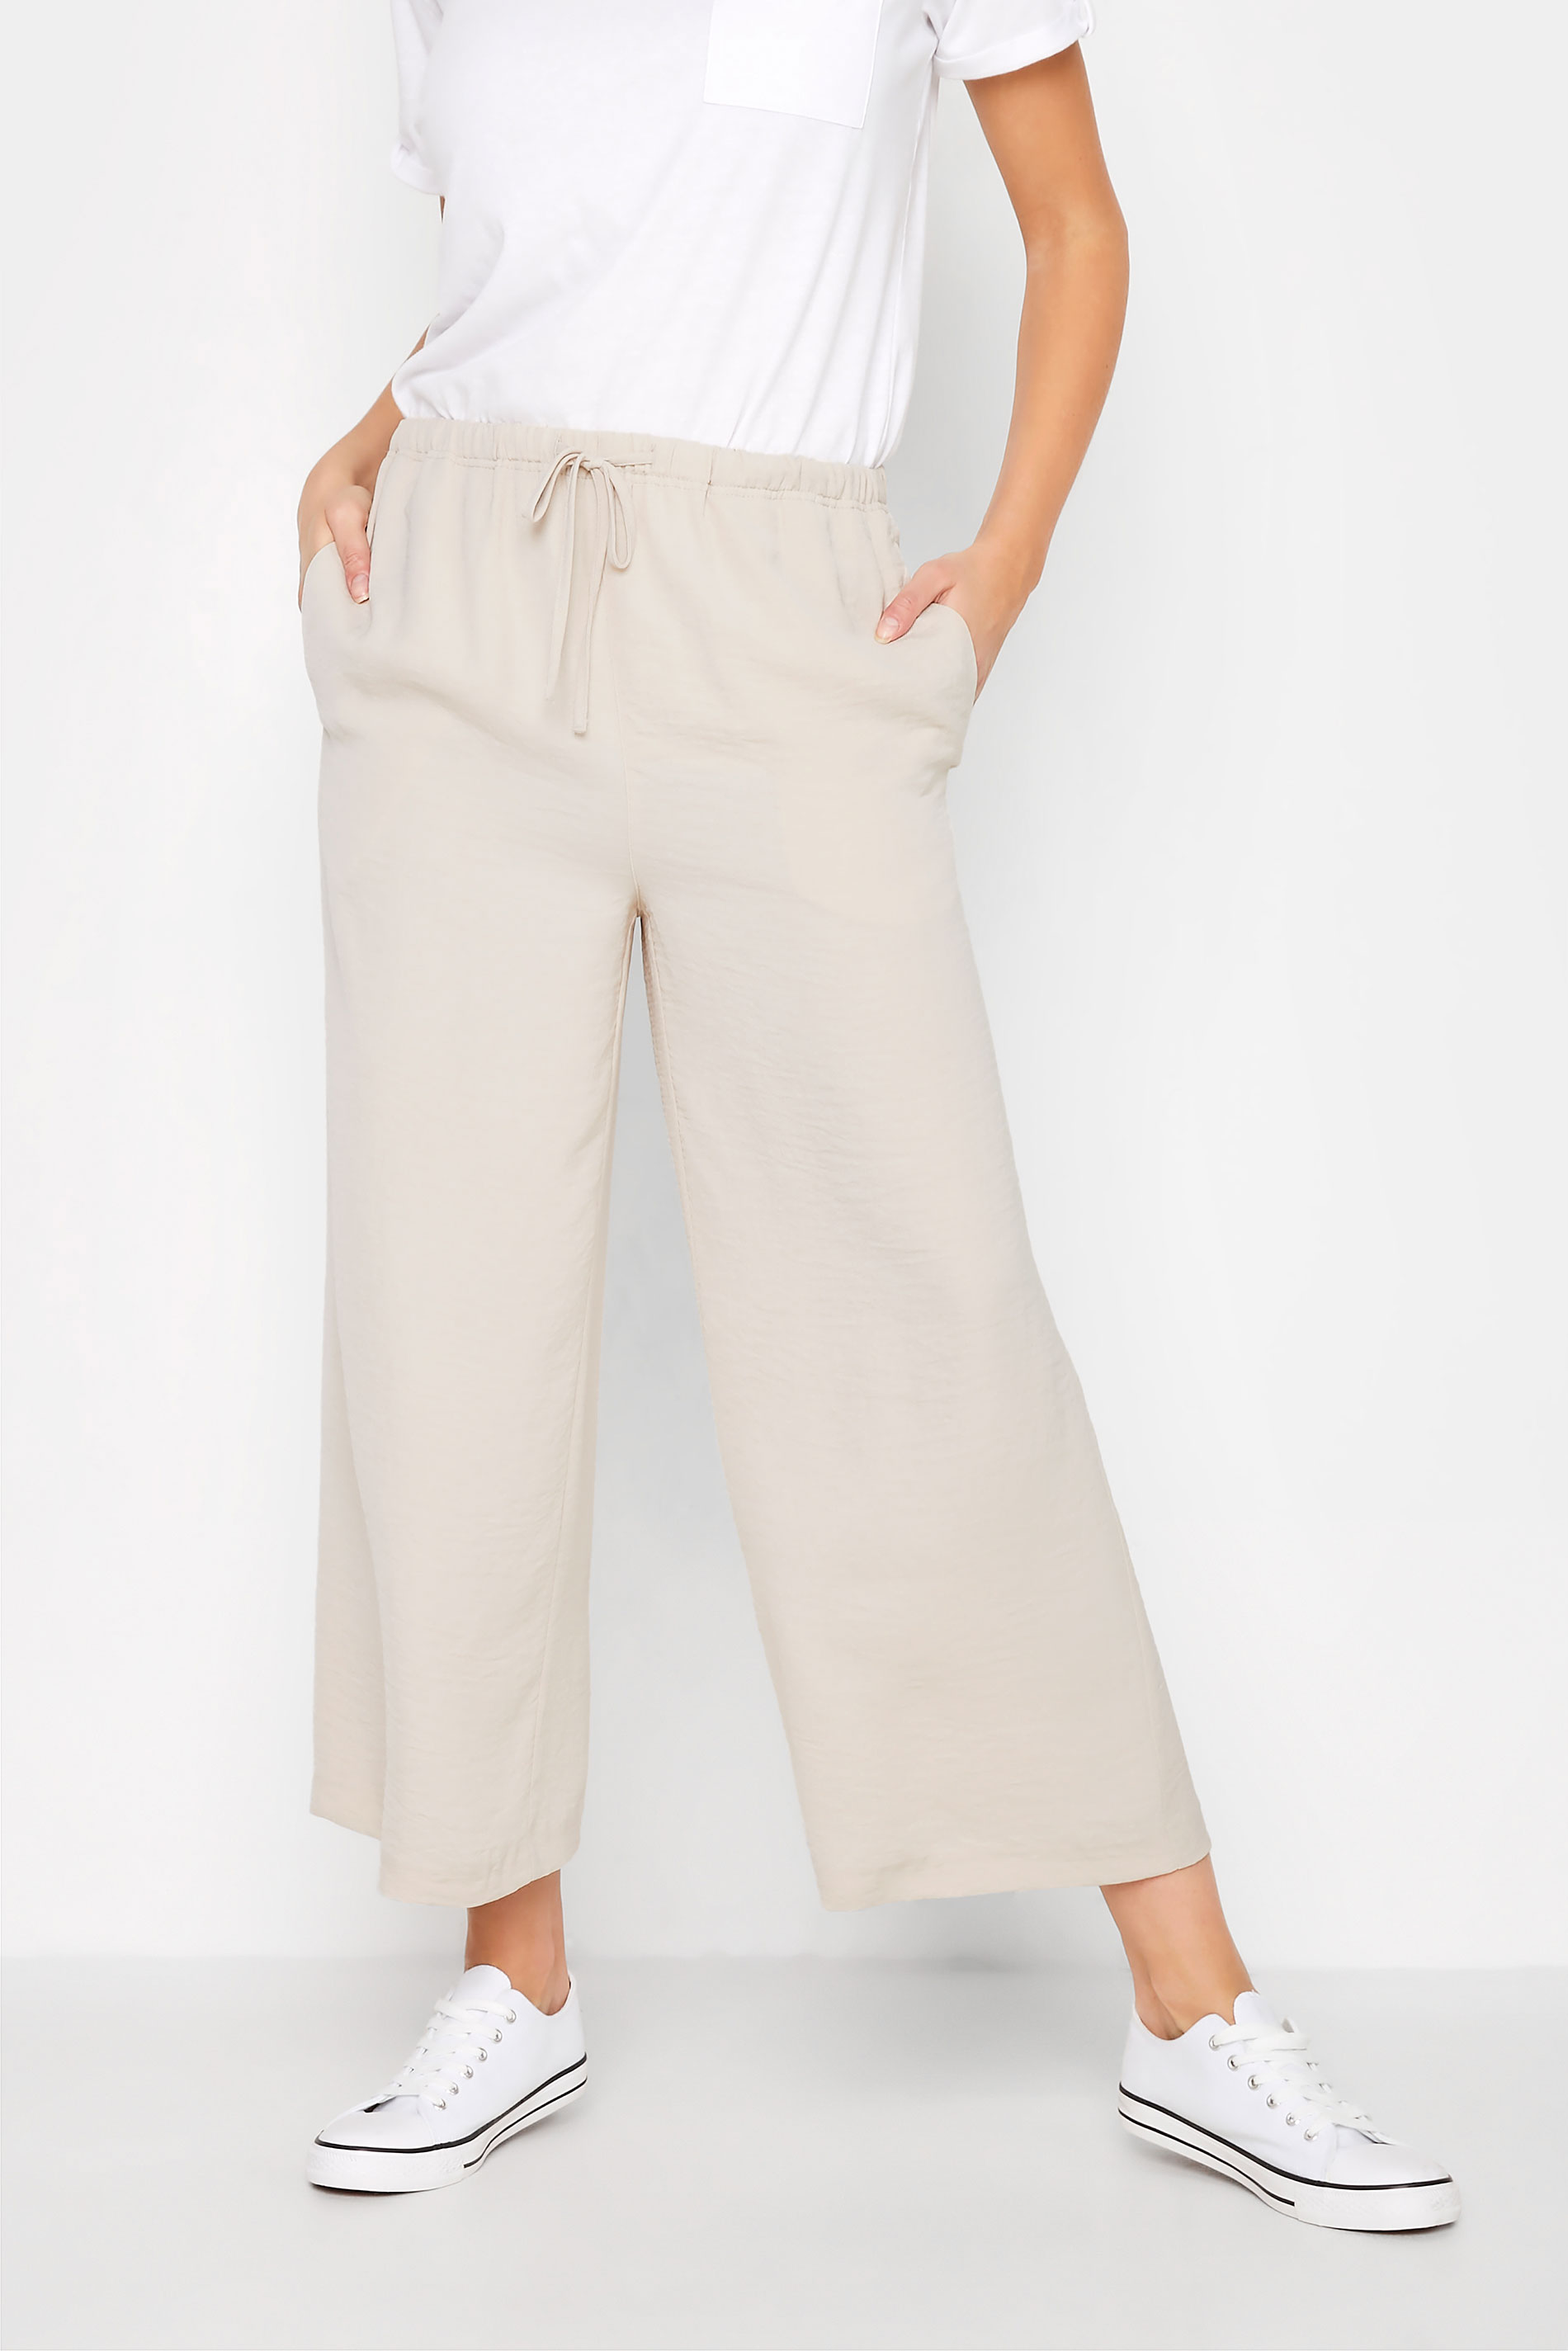 LTS Tall Women's Stone Brown Lightweight Twill Cropped Trousers | Long Tall Sally 1